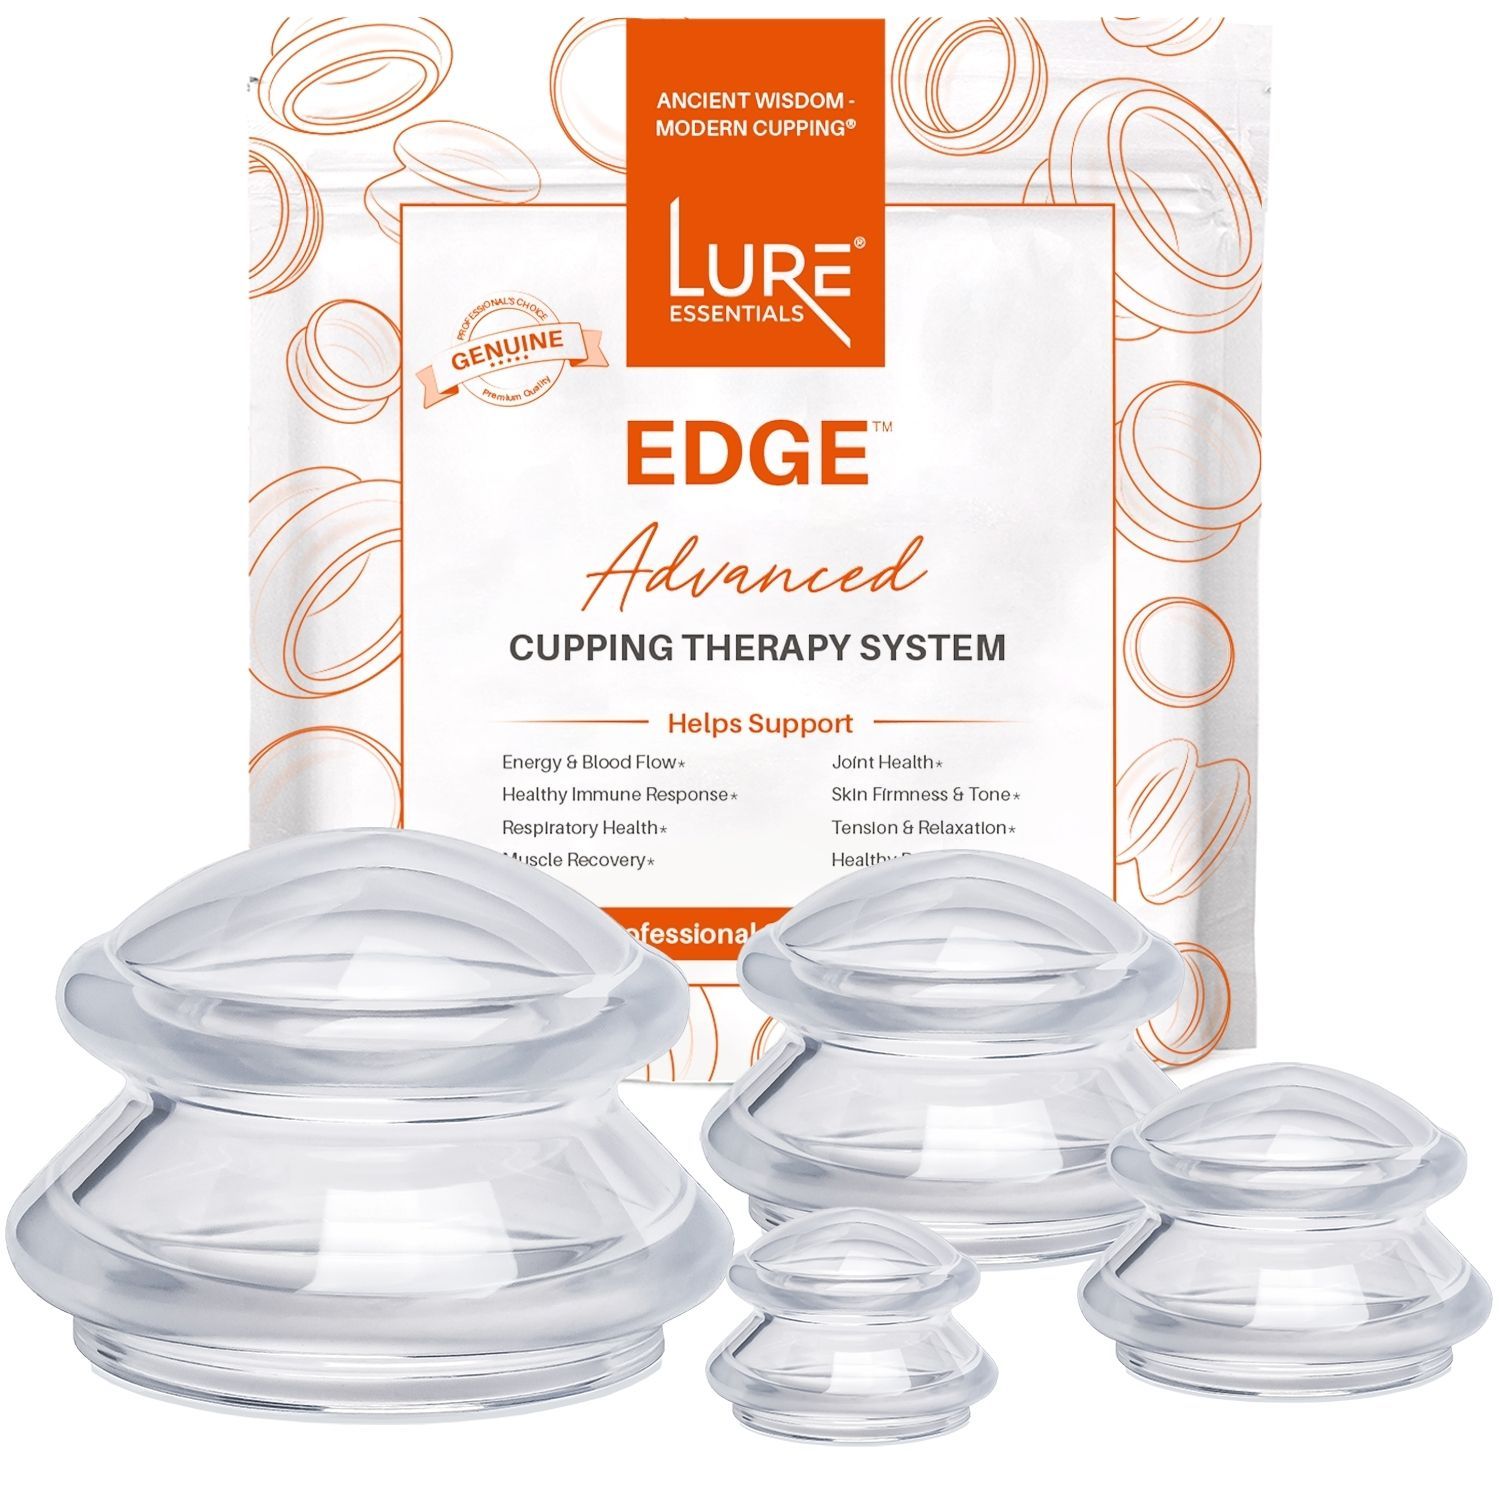 Lure Essentials Review - Cupping Therapy Set